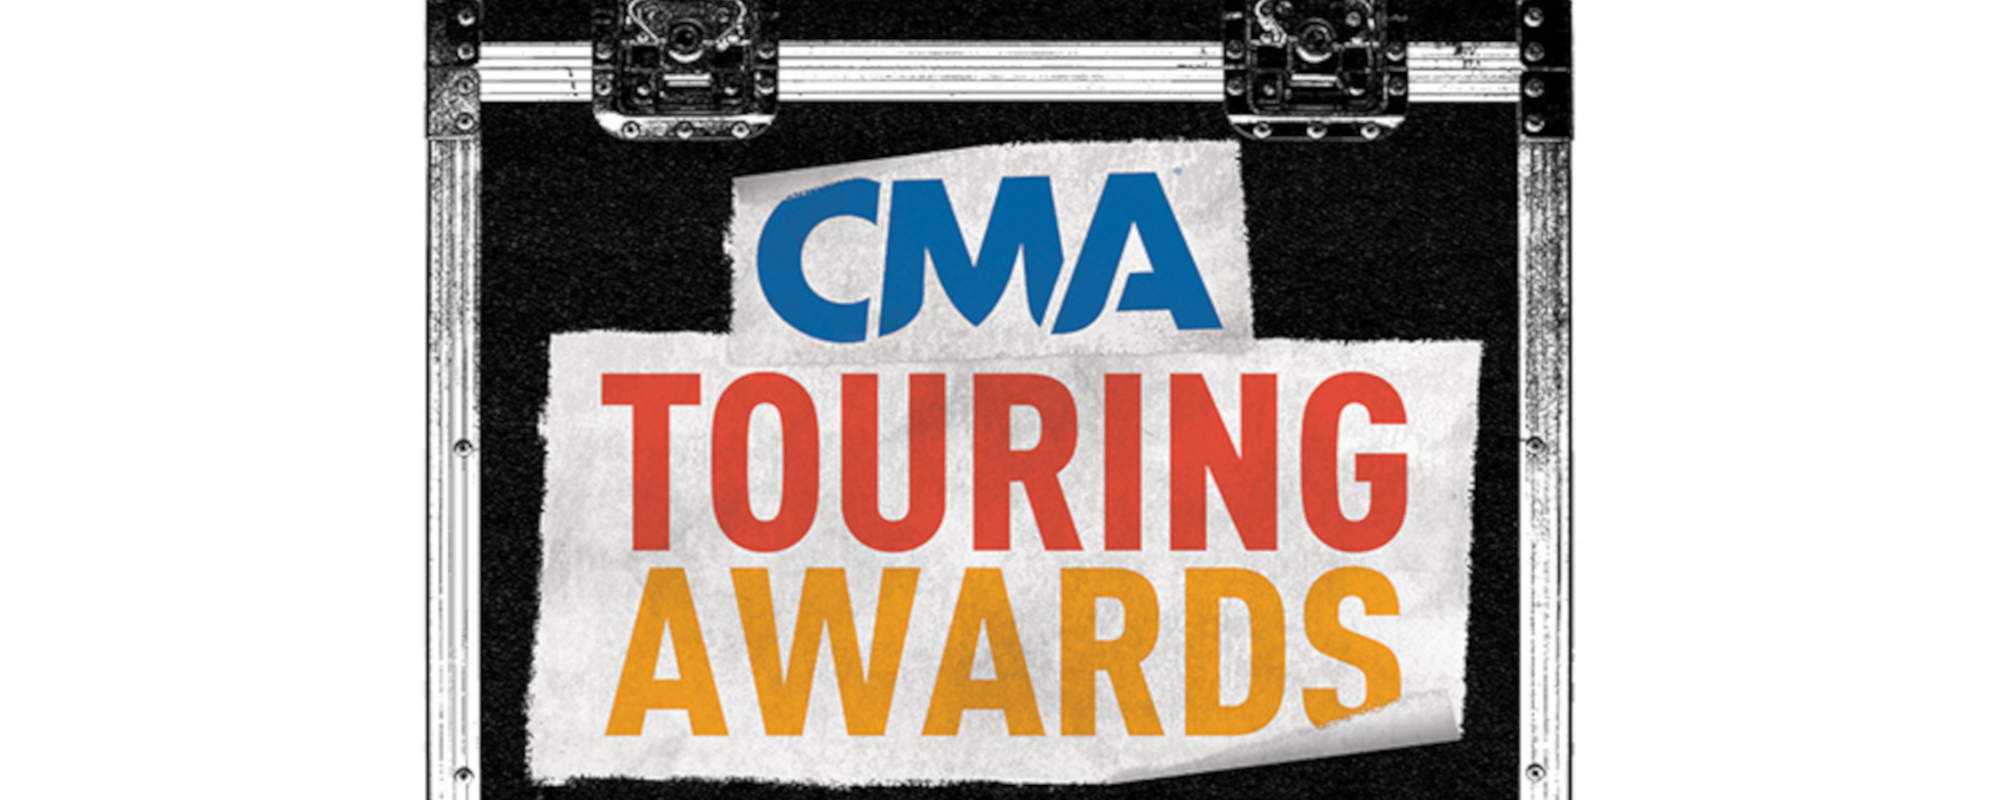 CMA Touring Awards Announced with 5 New Categories American Songwriter